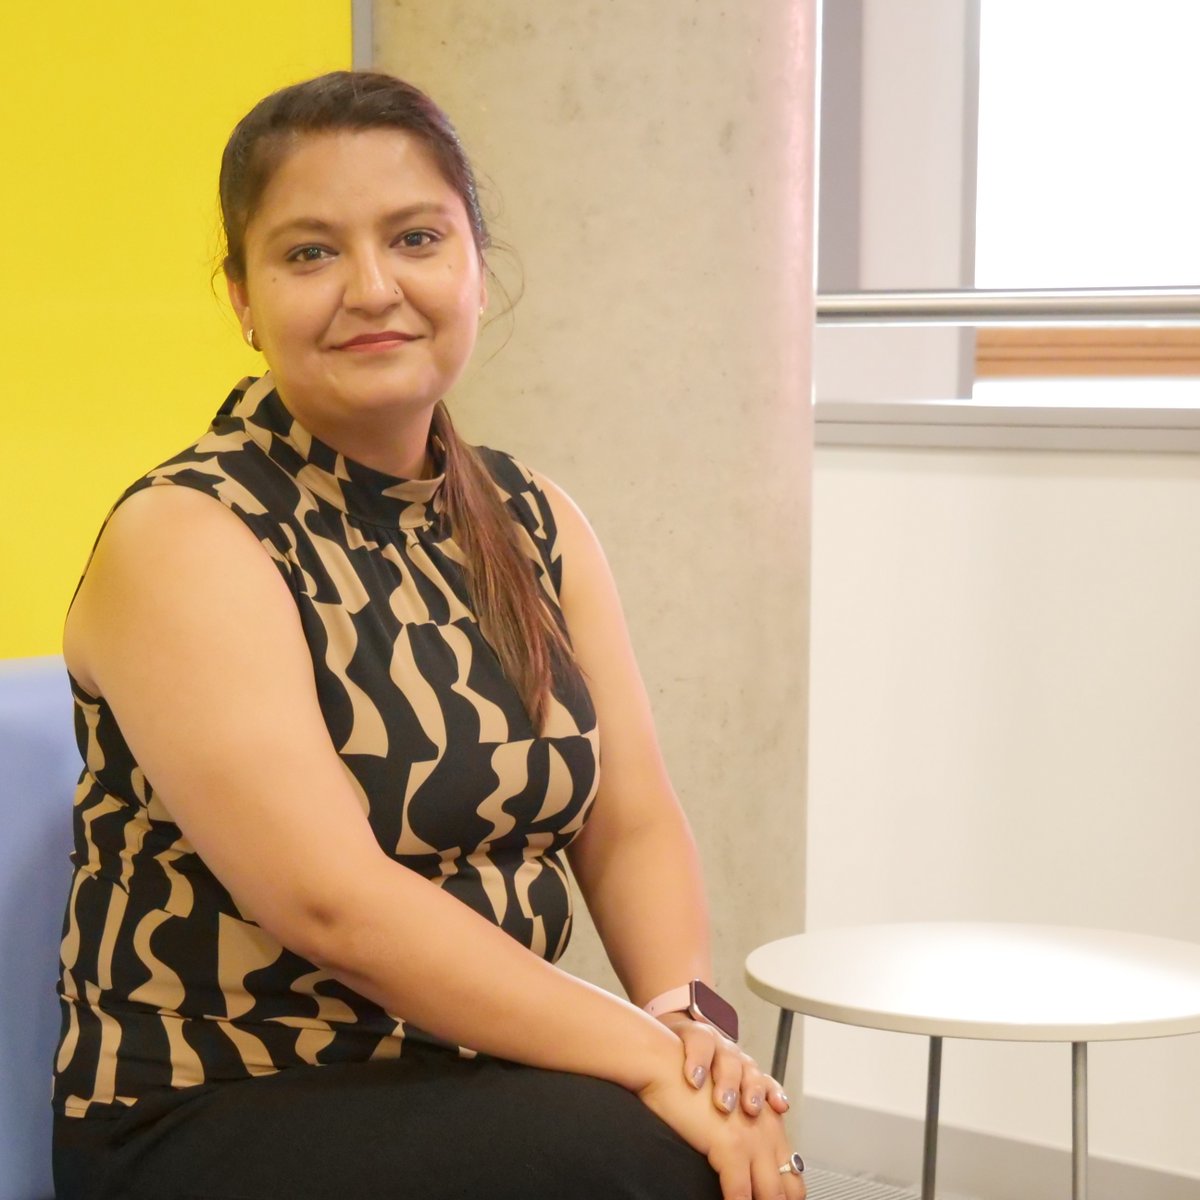 We're proud to be supporting the #WeAreInternational campaign, celebrating our international students who bring invaluable perspectives and enrich our academic environment. Take a look at Deepali's story: bit.ly/3xYWFeg #HelloSuffolk #UniOfSuffolk